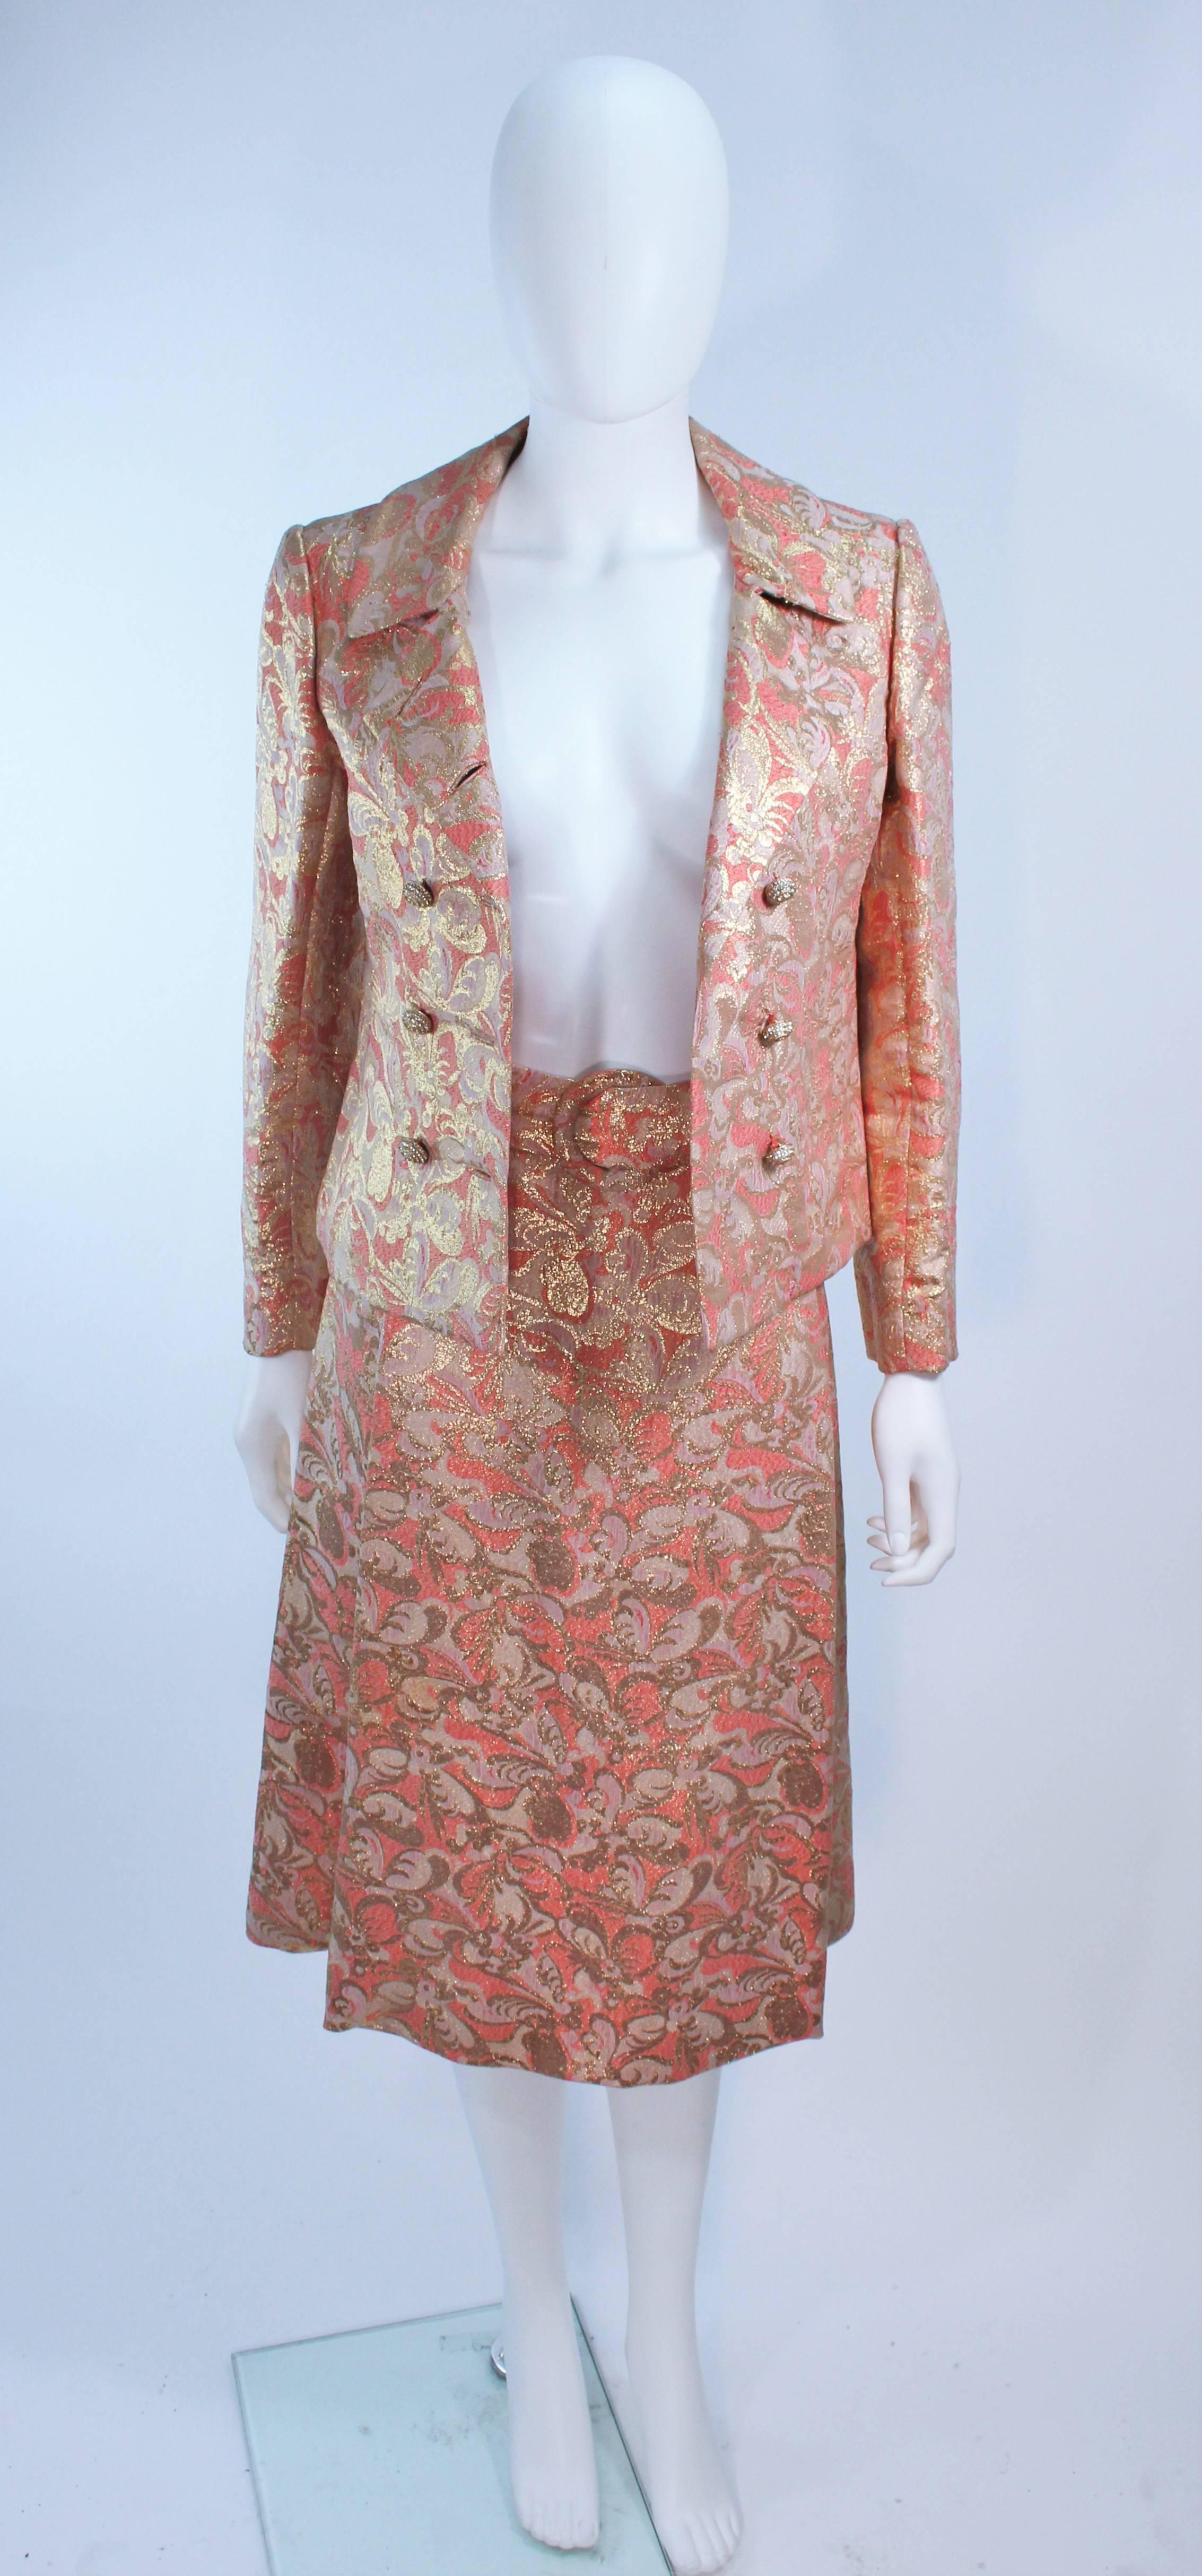 Jimi Fox Peach & Gold Brocade Skirt Suit with Rhinestone Buttons Size 6 In Excellent Condition For Sale In Los Angeles, CA